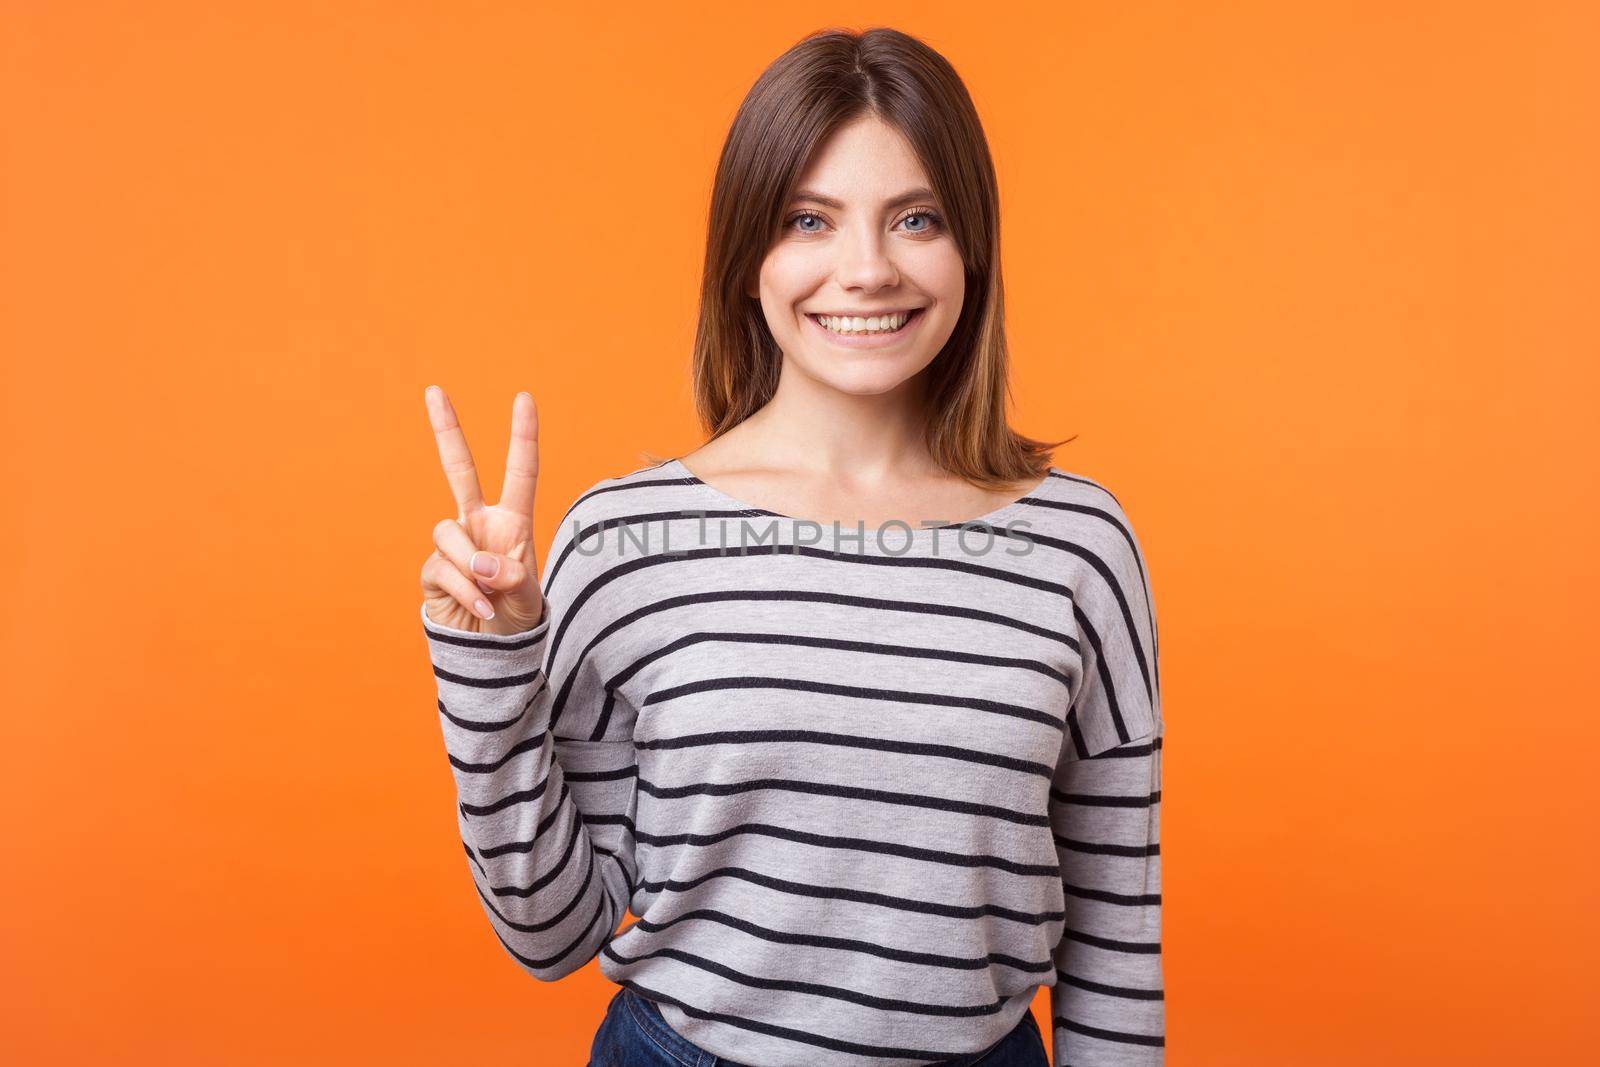 Portrait of happy charming woman with brown hair in long sleeve striped shirt smiling looking at camera and showing peace or victory sign with fingers. indoor studio shot isolated on orange background